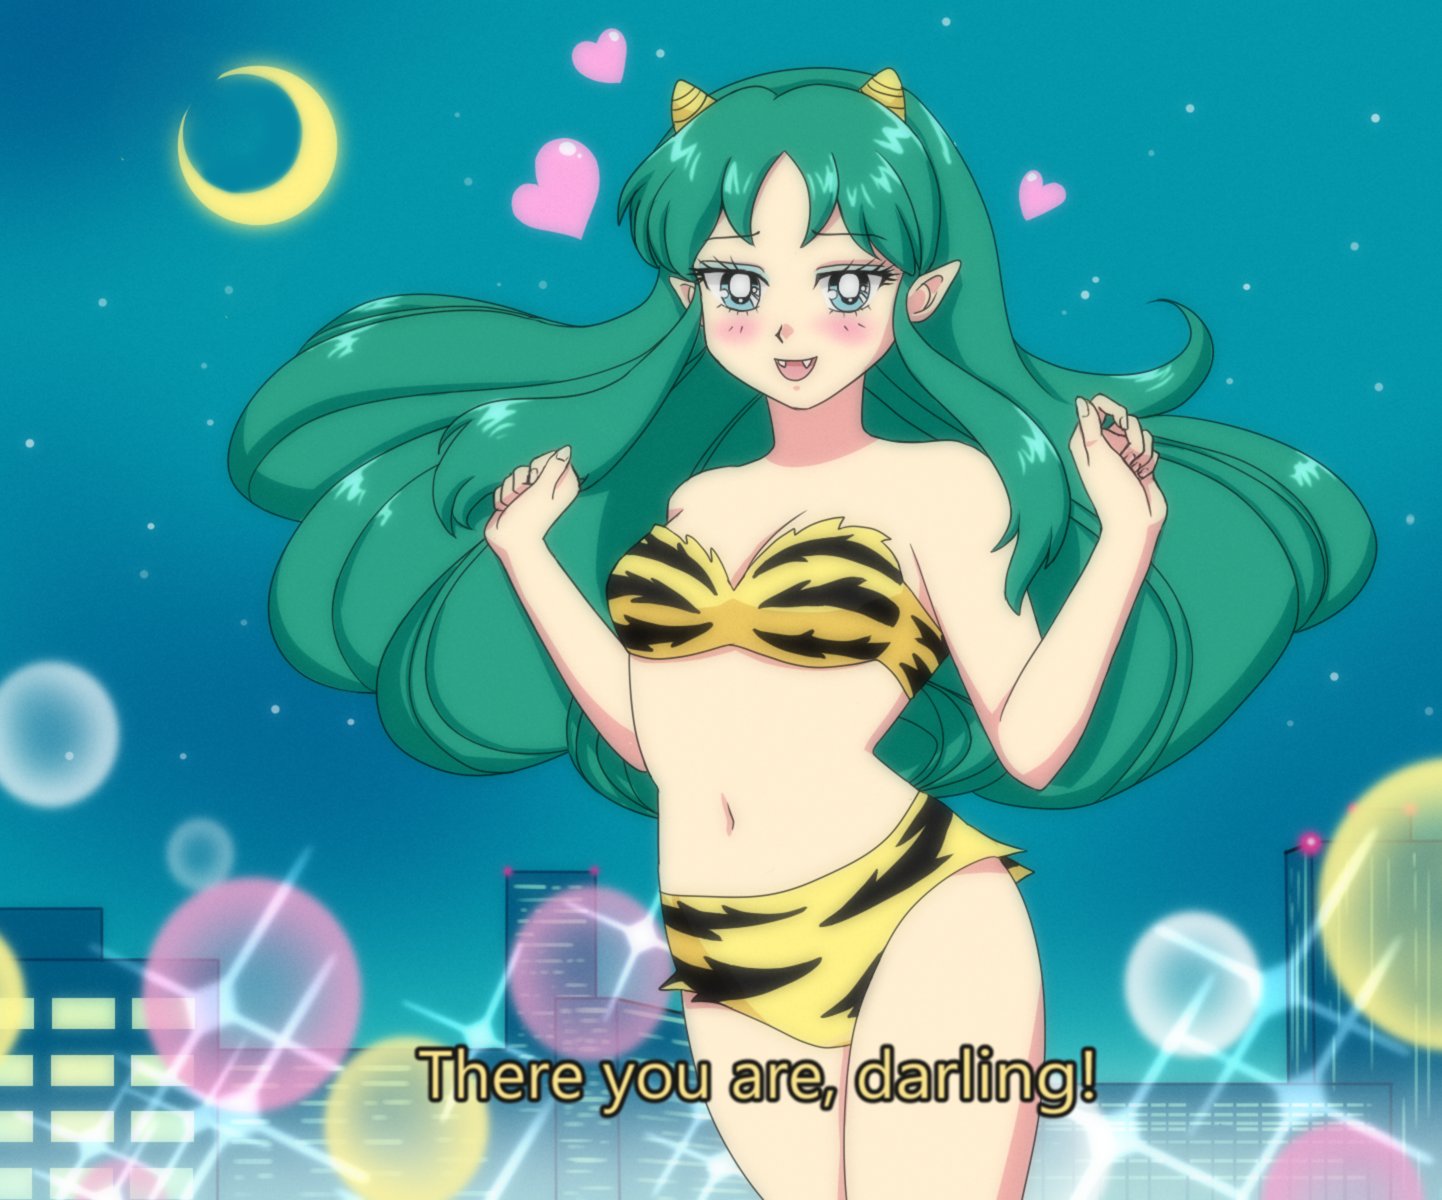 spids Pornografi til bundet MiYel on Twitter: "Another fake 90's anime screencap, with Lum invader from  Urusei Yatsura. An og vaporwave girl... I might open some comissions in  this Sailor Moon style! https://t.co/1PuMFuFufW" / Twitter